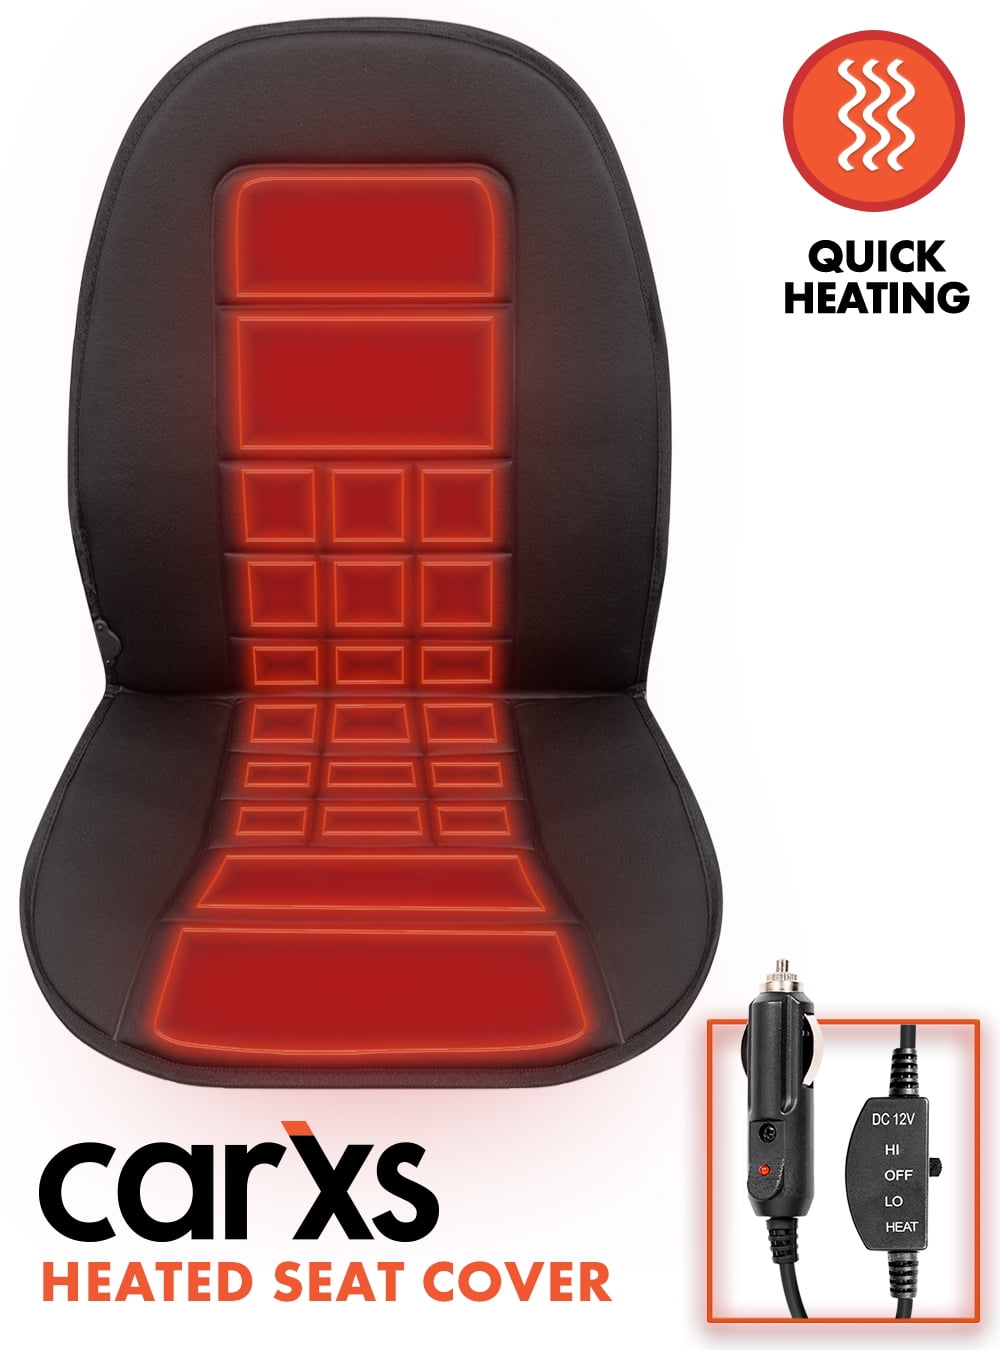 carXS Heated Seat Cover for Cars – Universal 12V Heated Car Seat